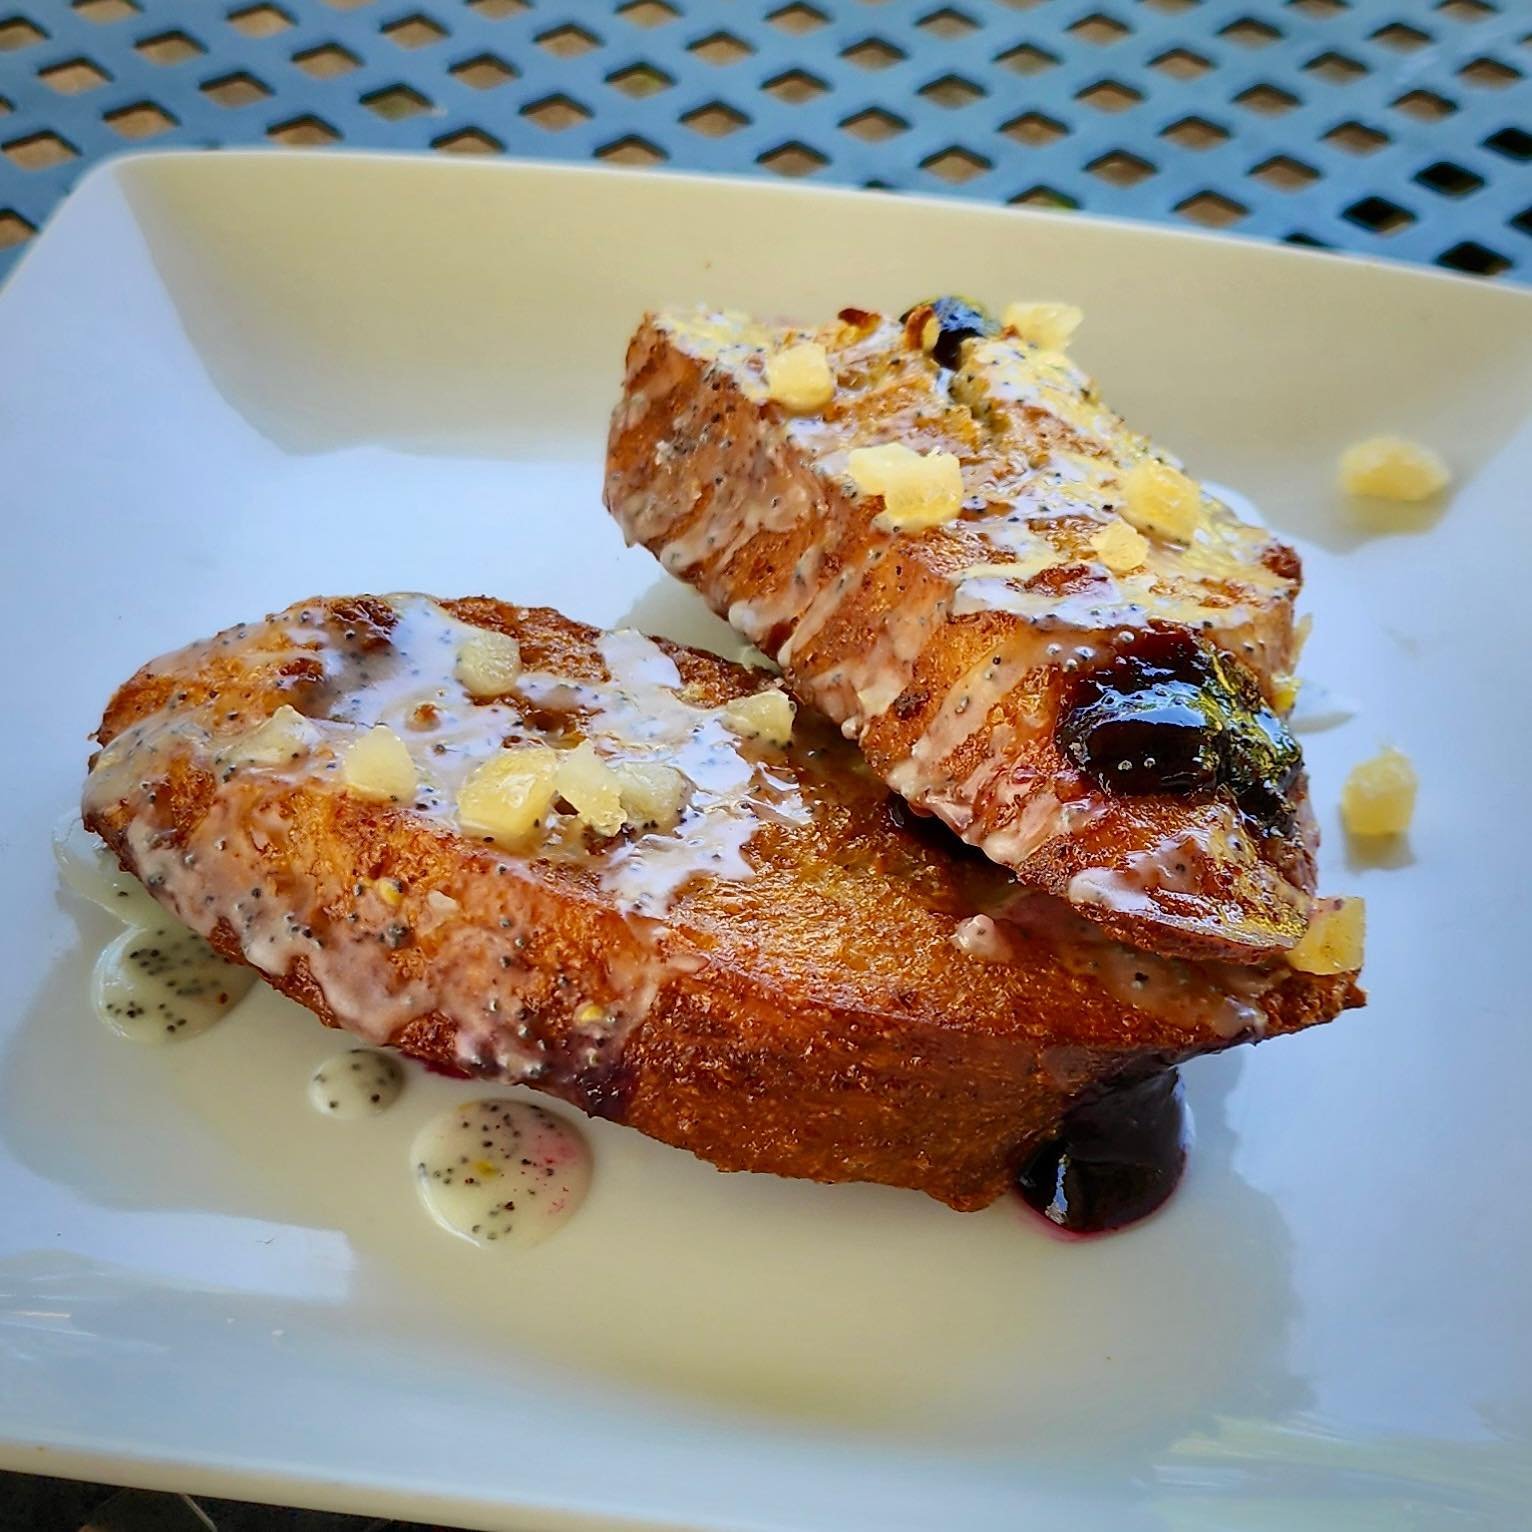 ✨Lemon Poppyseed Blueberry French Toast✨
We are featuring some of our favorite specials as we inch closer to Memorial Day next week so we had to include our Lemon Poppyseed Blueberry French Toast! Sweet blueberry compote stuffed inside our perfectly 